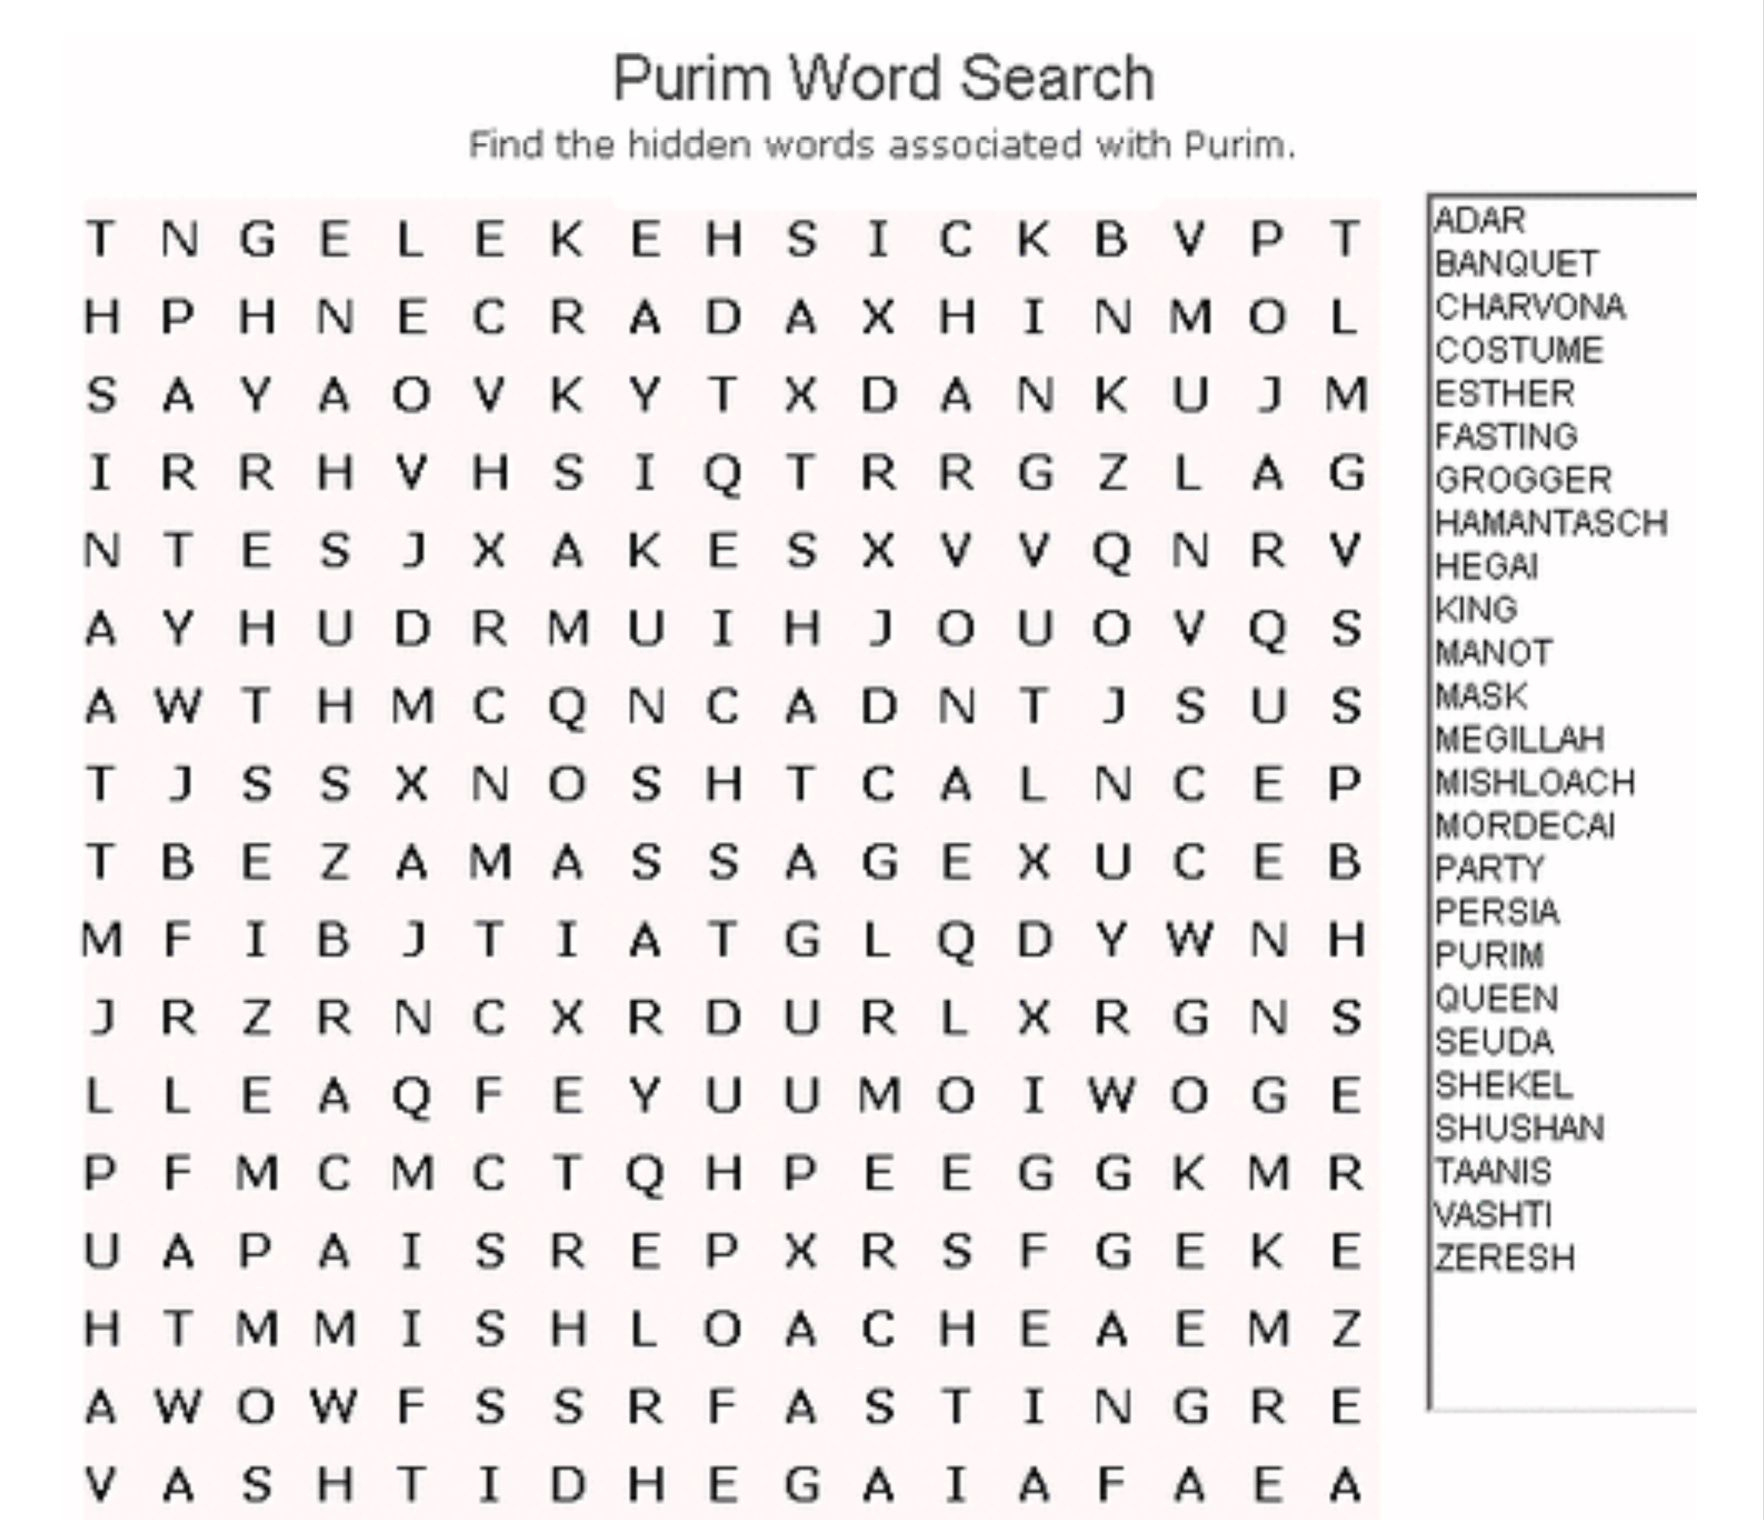 Purim Word Search | Kitah Dalet | Free Word Search Puzzles, Word - Free Printable General Knowledge Crossword Puzzles